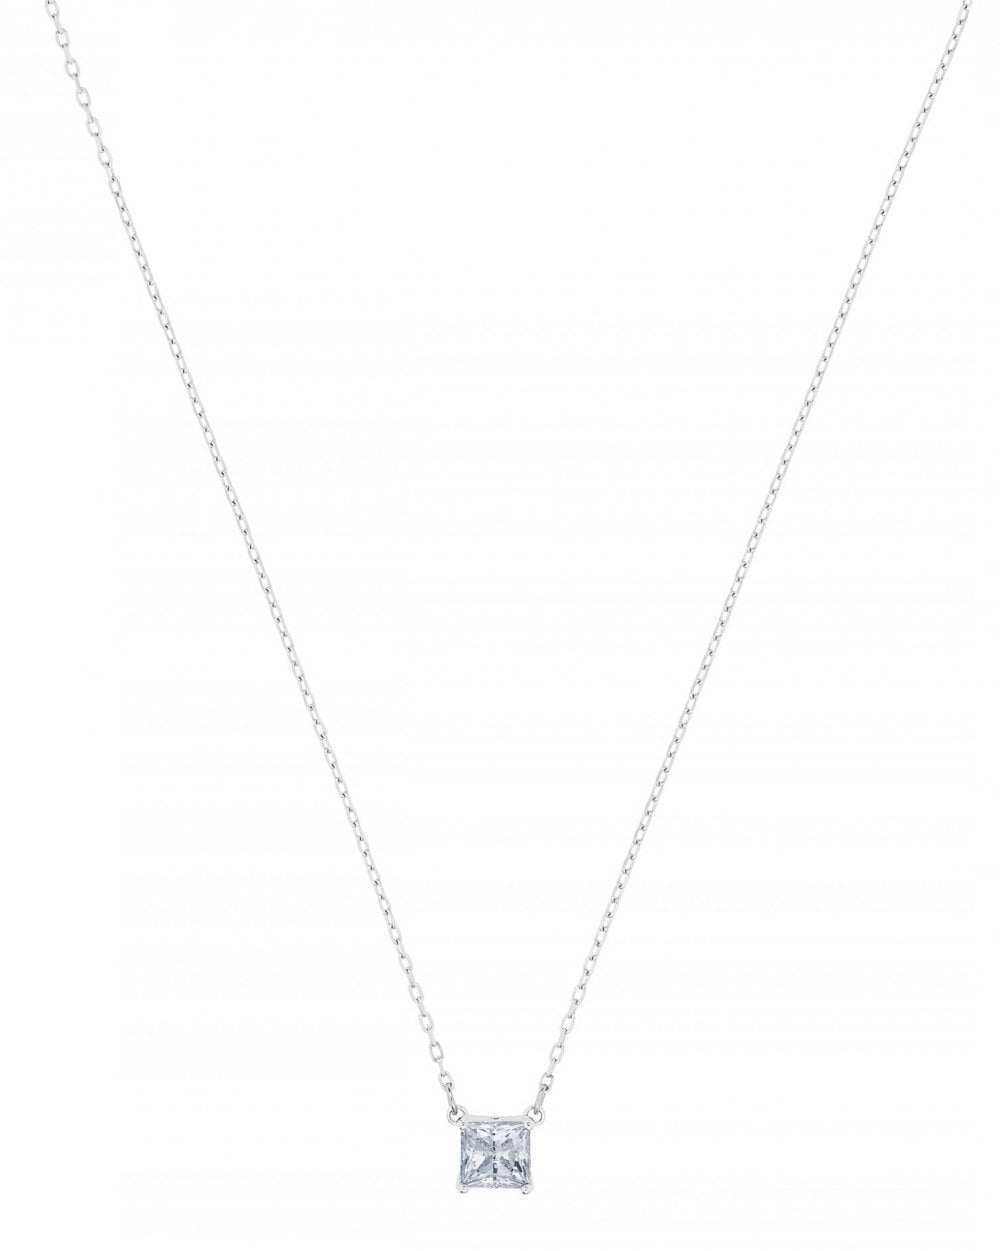 Attract Necklace- White